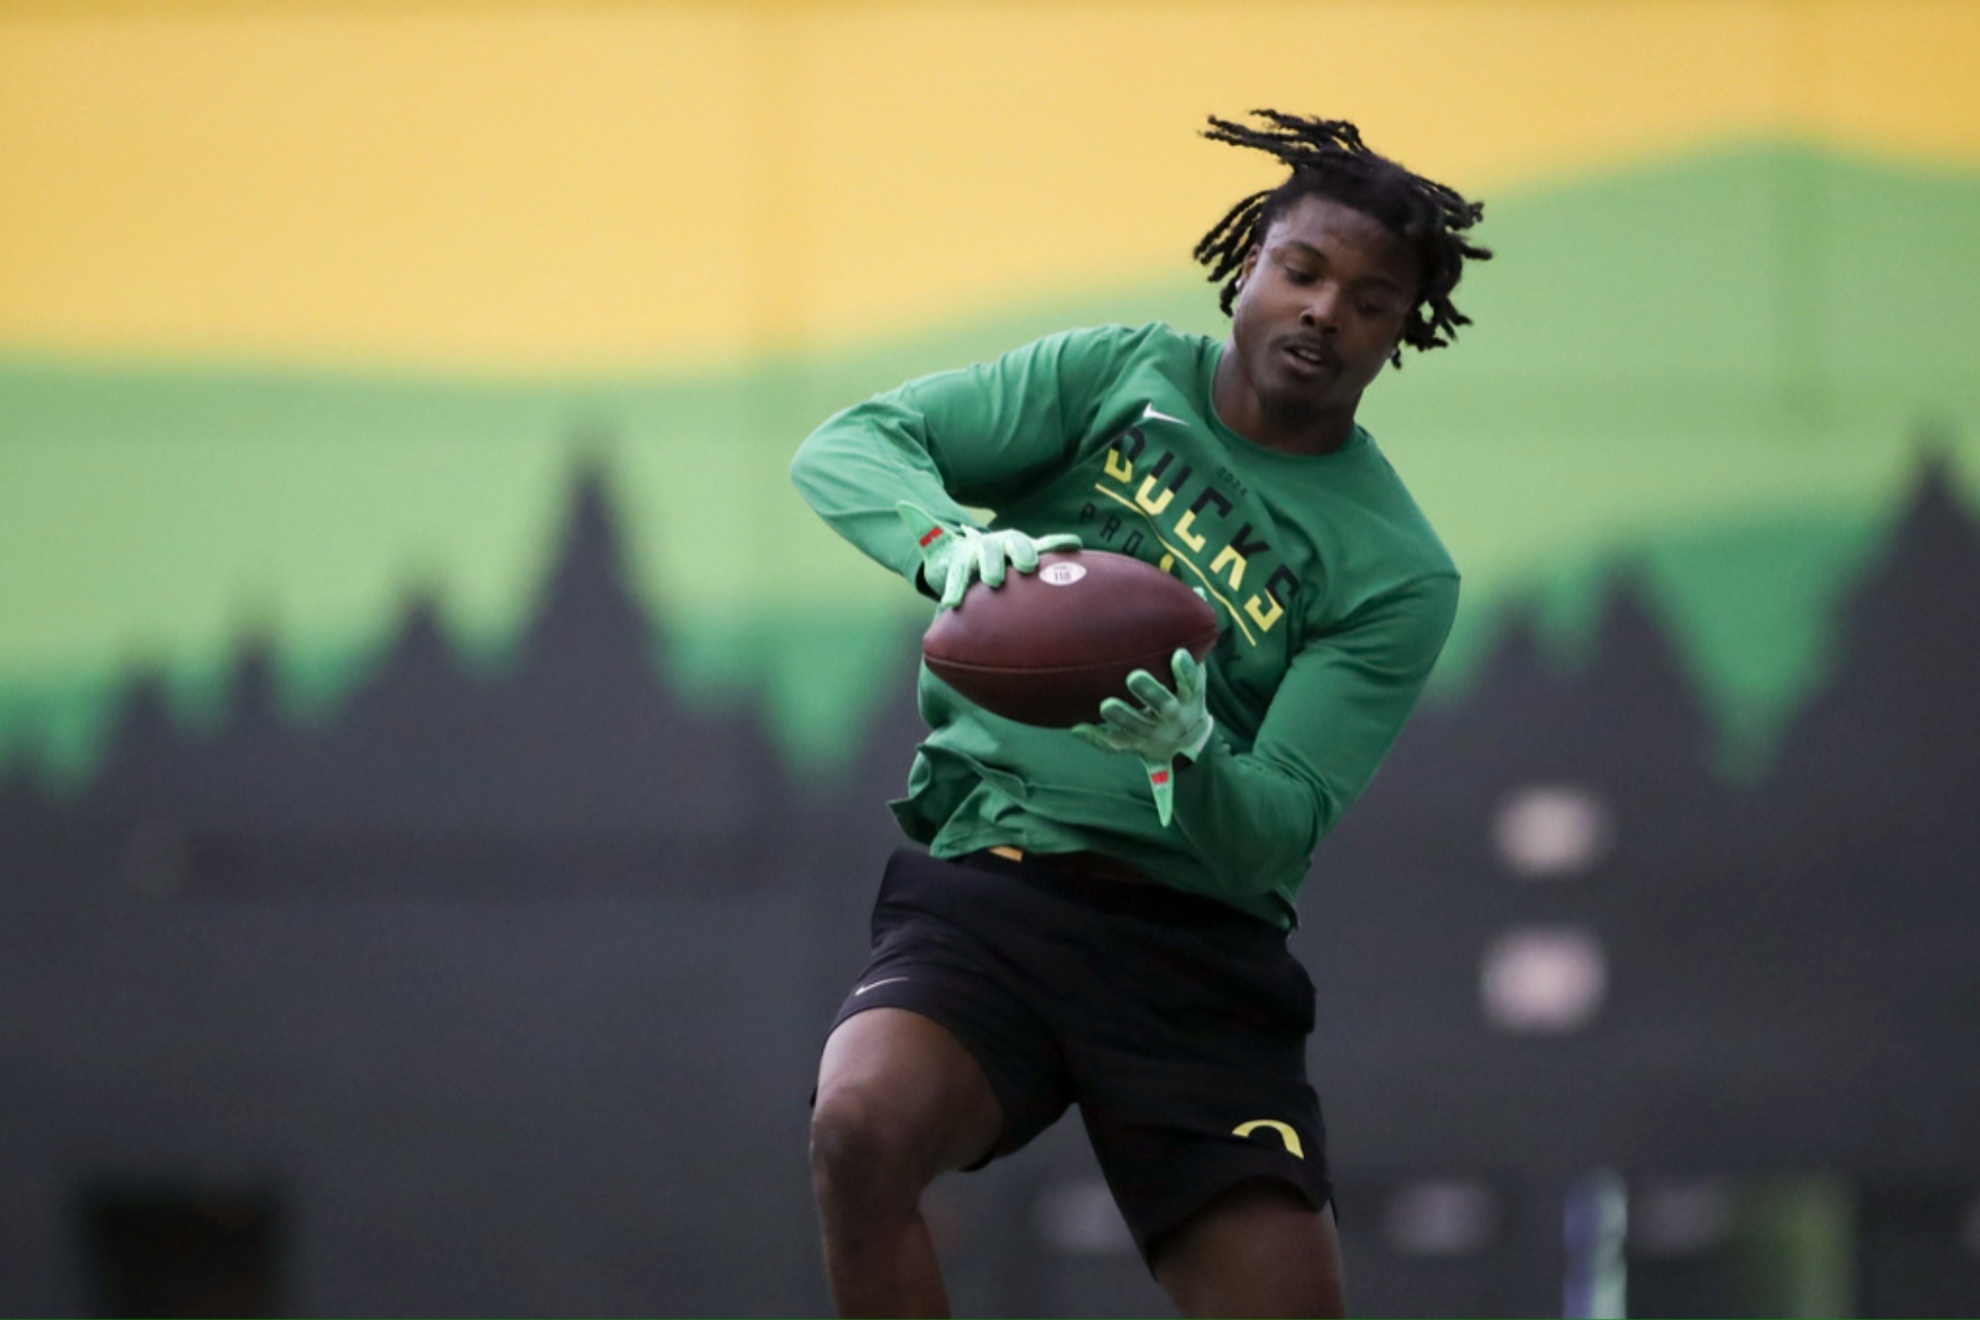 Khyree Jackson participating in a position drill at Oregons NFL Pro Day.